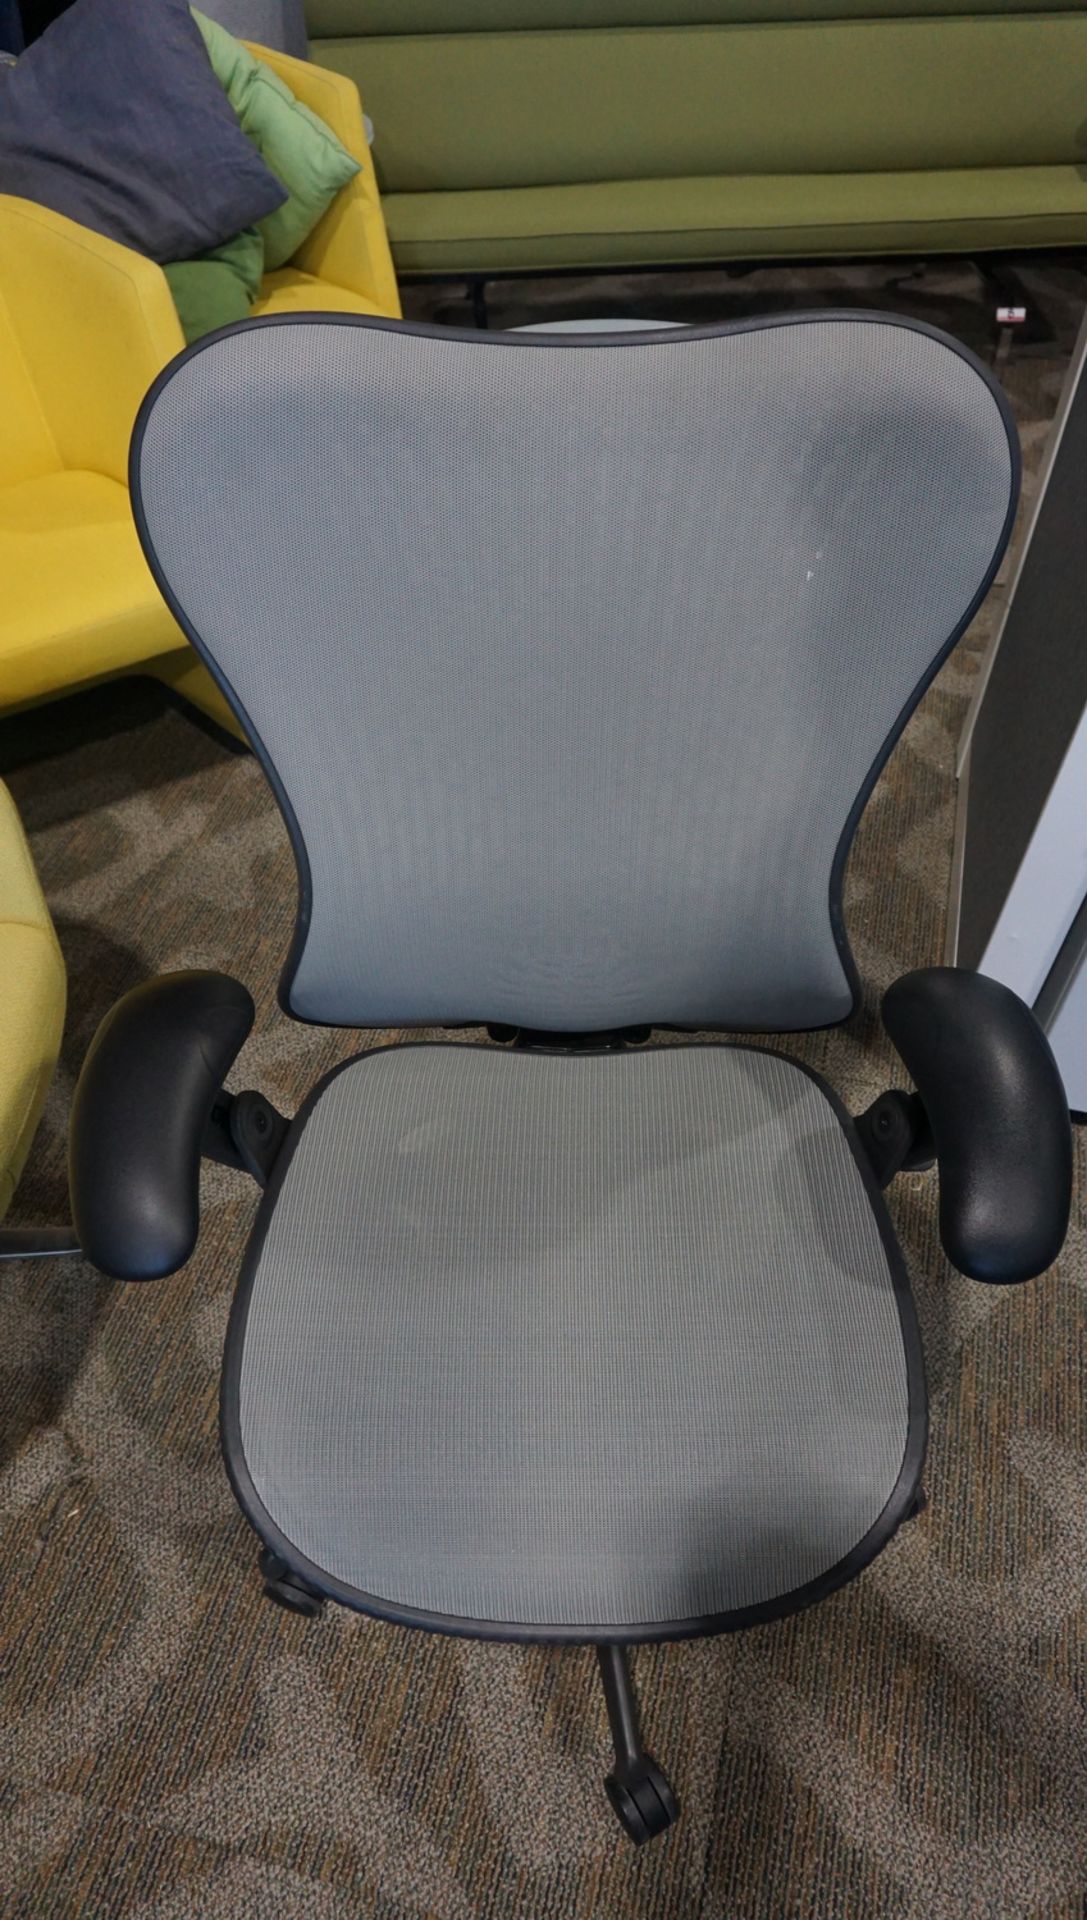 HERMAN MILLER MIRRA 1 OFFICE CHAIR W/ LUMBAR SUPPORT, BACK LOCK, ARM / SEAT ADJUSTMENTS - Image 5 of 5